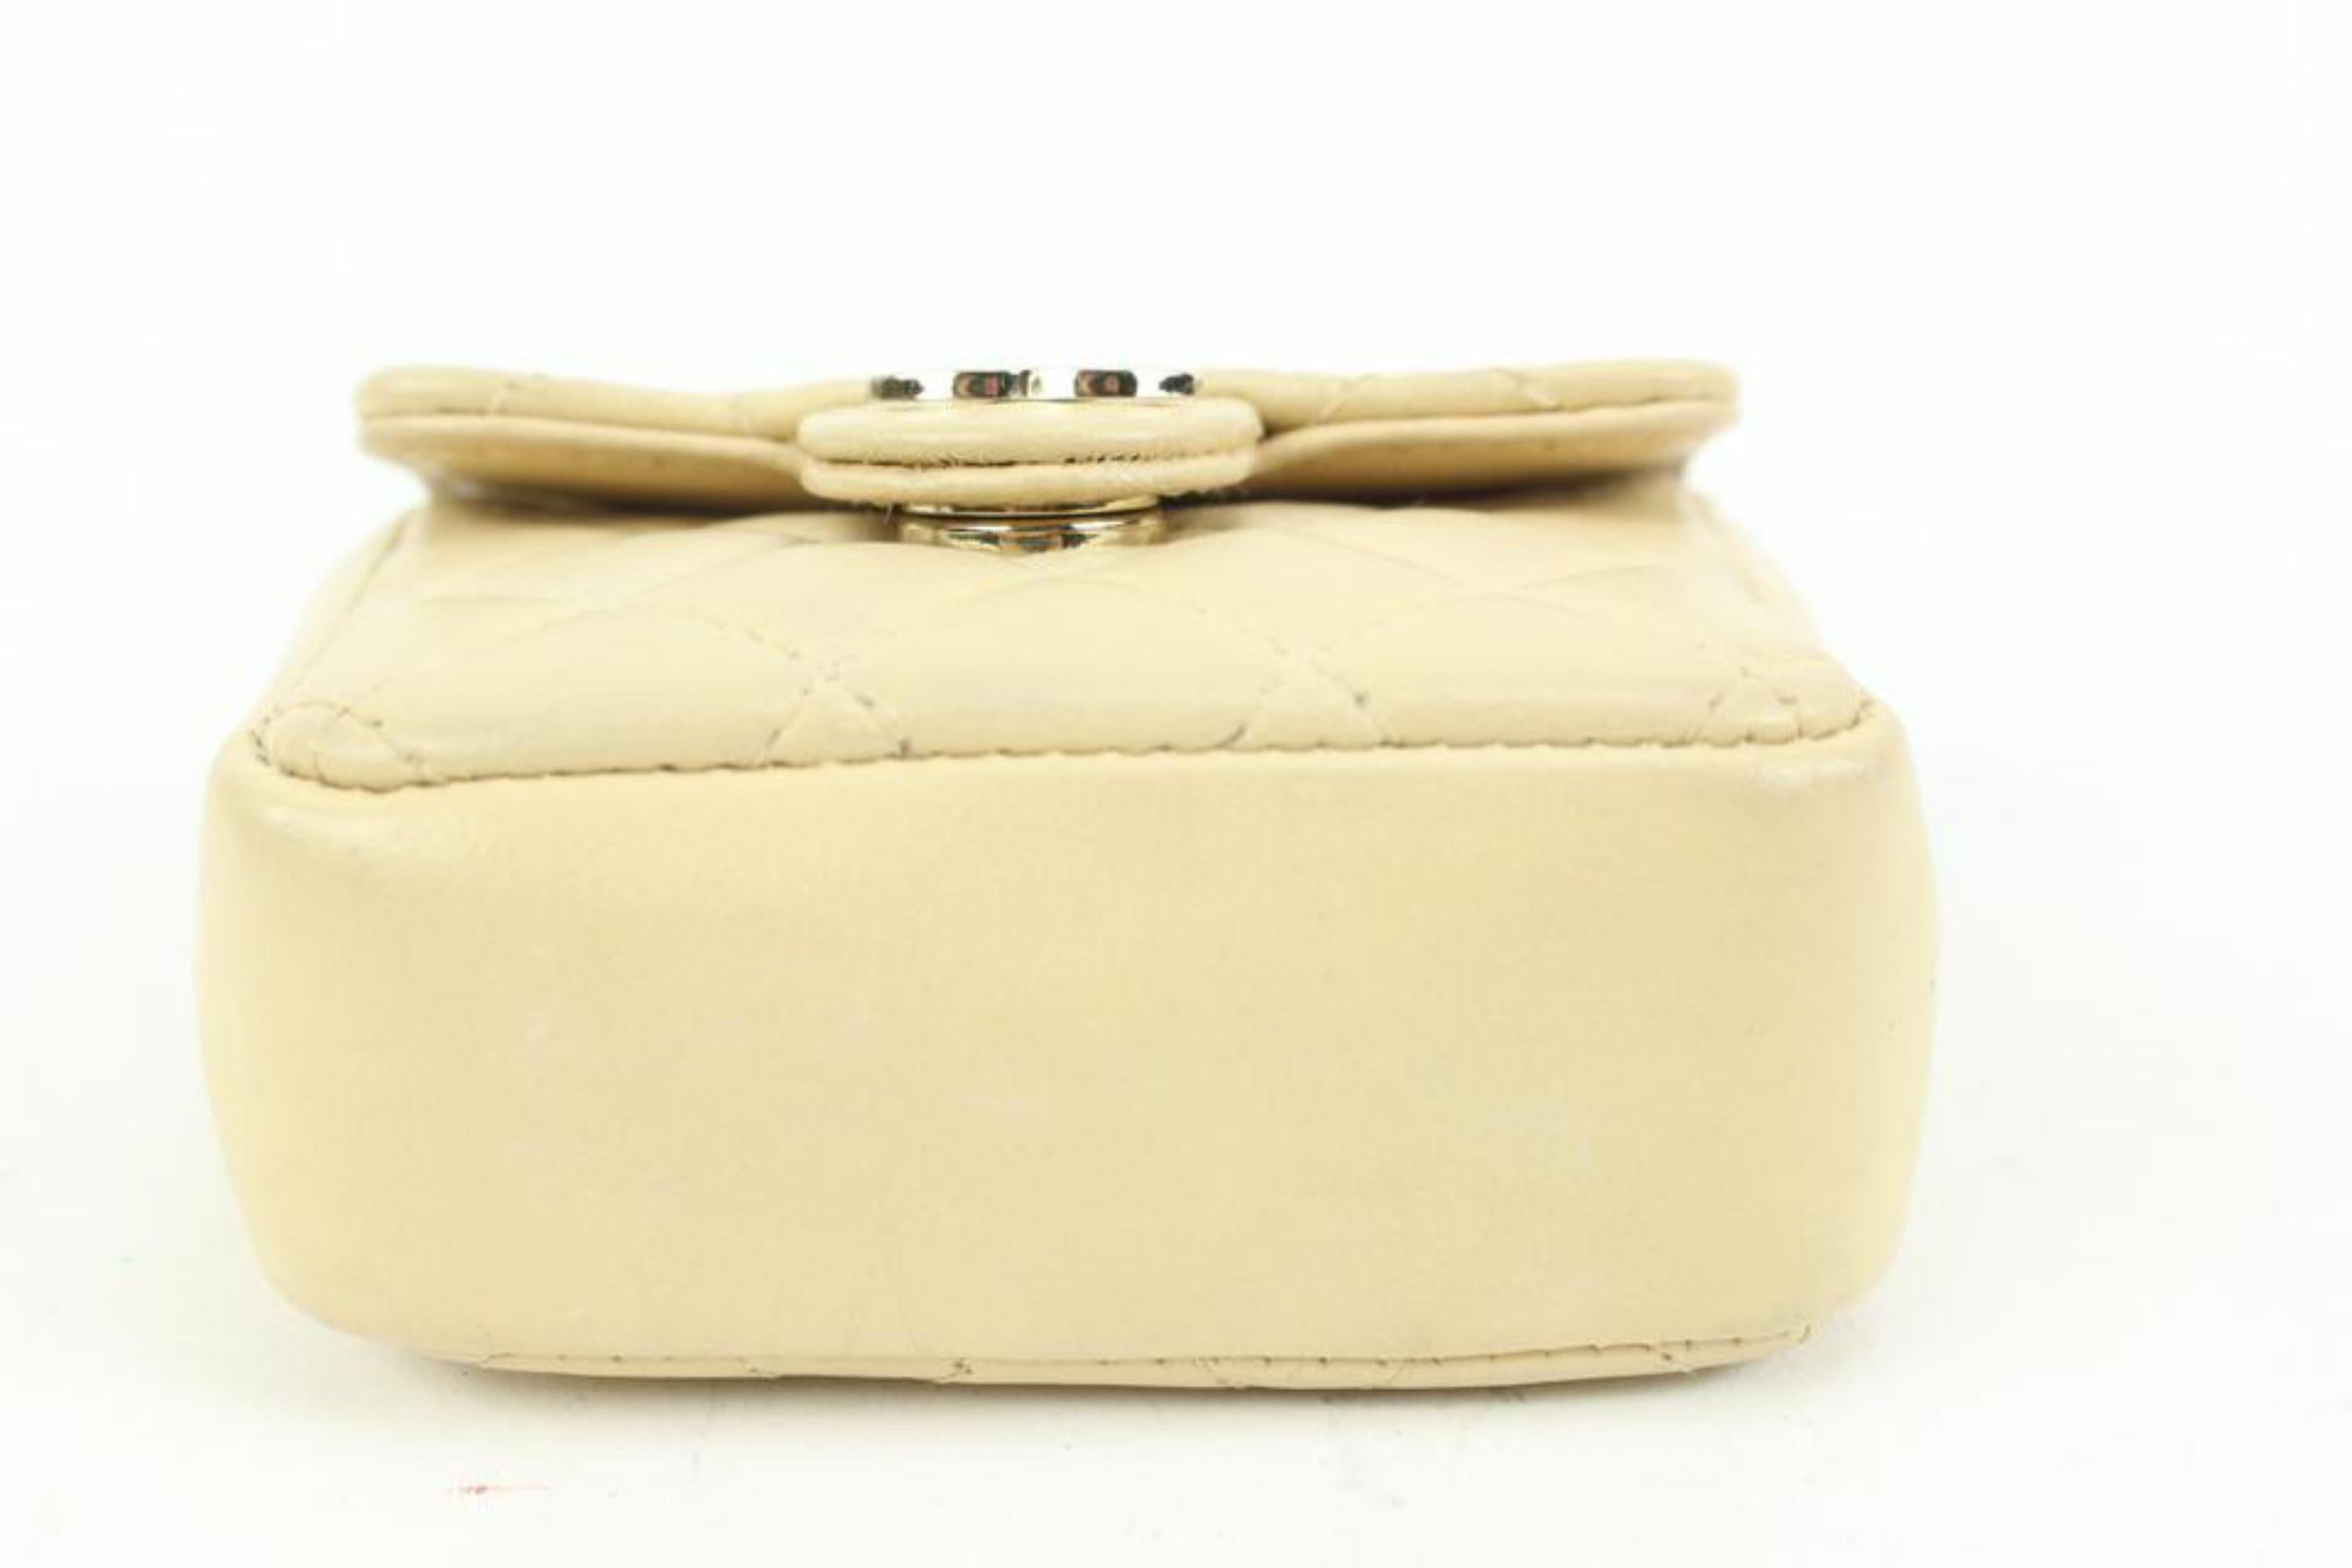 Chanel Light Beige Cream Quilted Leather Micro Flap Charm Bag Mini 48cz47 For Sale 2